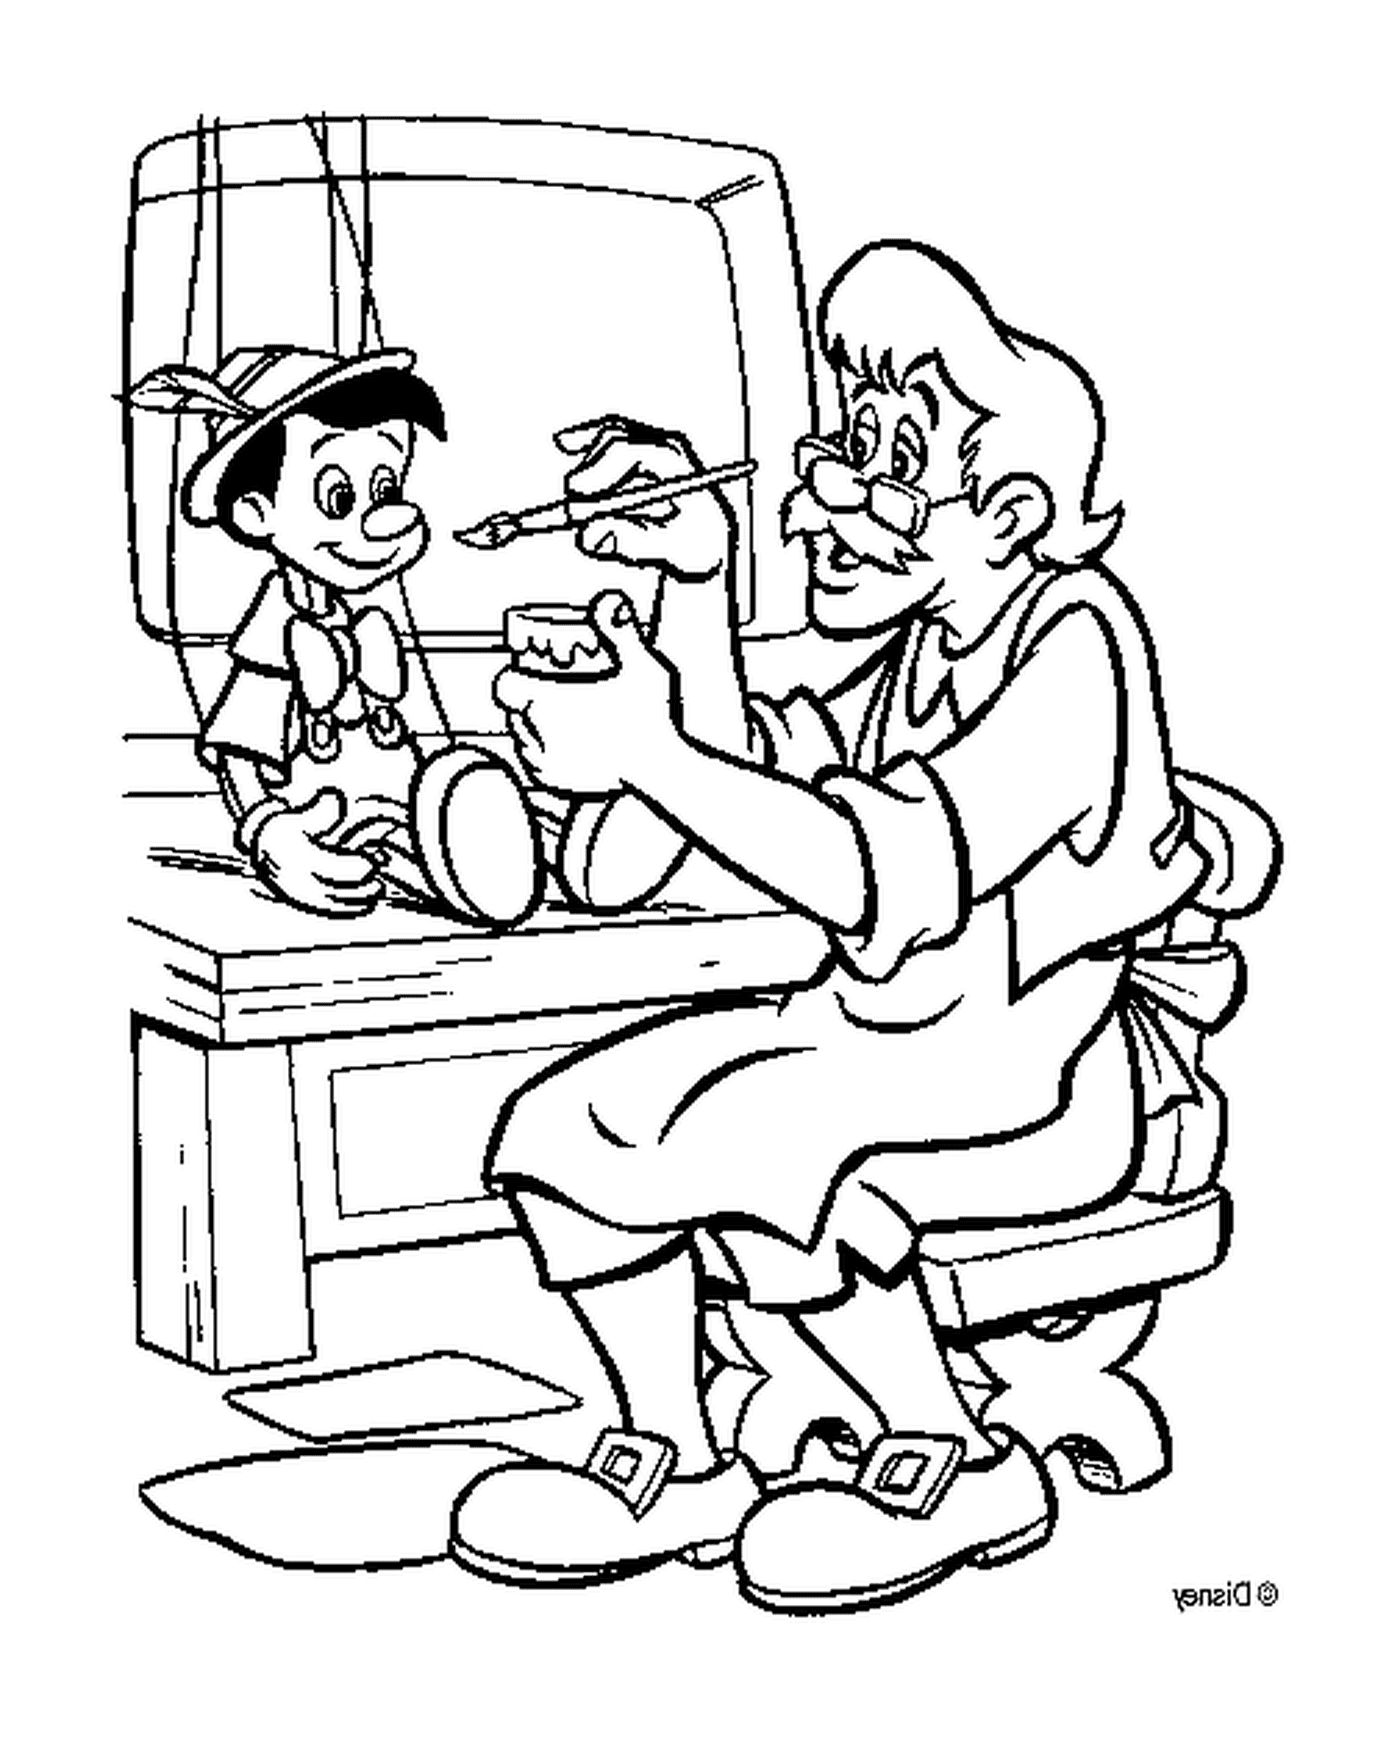  Geppetto manufactures Pinocchio in his workshop 